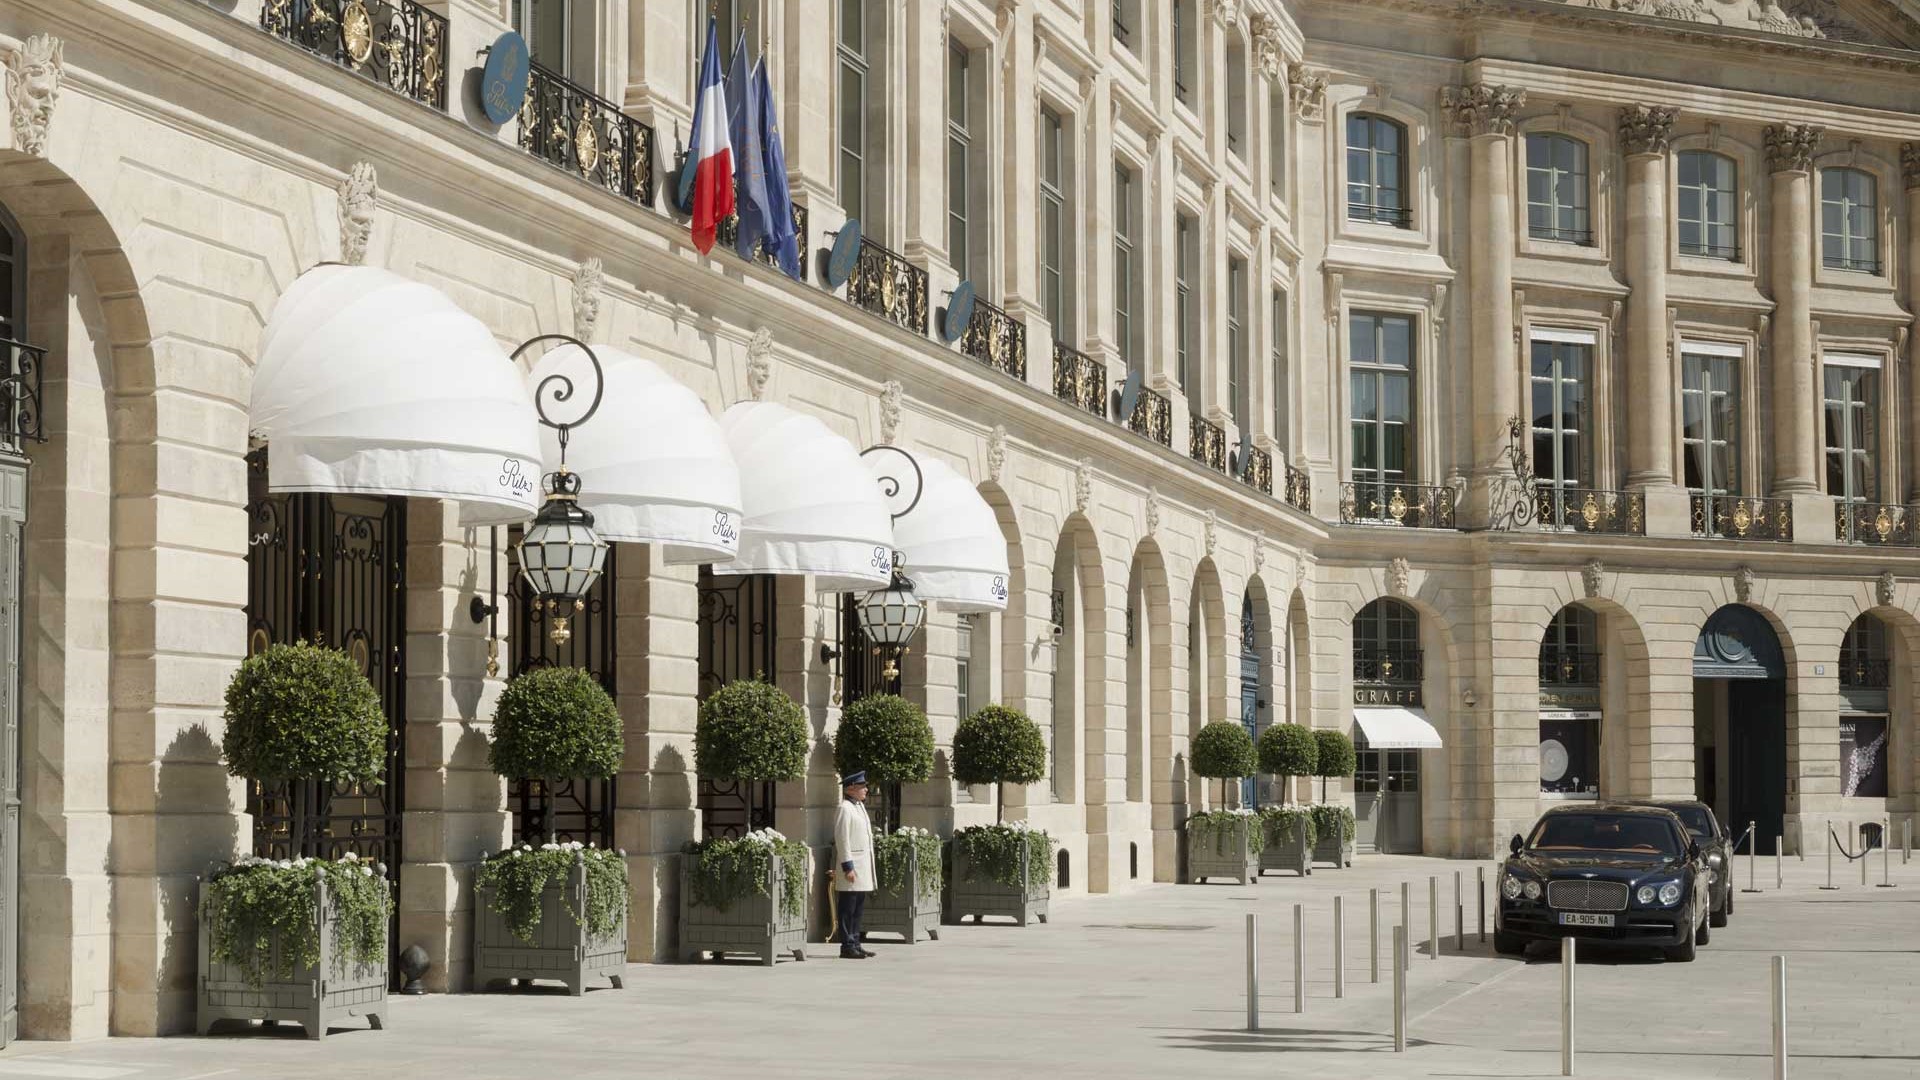 The Ritz Paris Is A Hotel In Central Paris, Overlooking The Place Vendome  In The Citys 1st Arrondissement. It Ranked Among The Most Luxurious Hotels  In The World. Stock Photo, Picture and